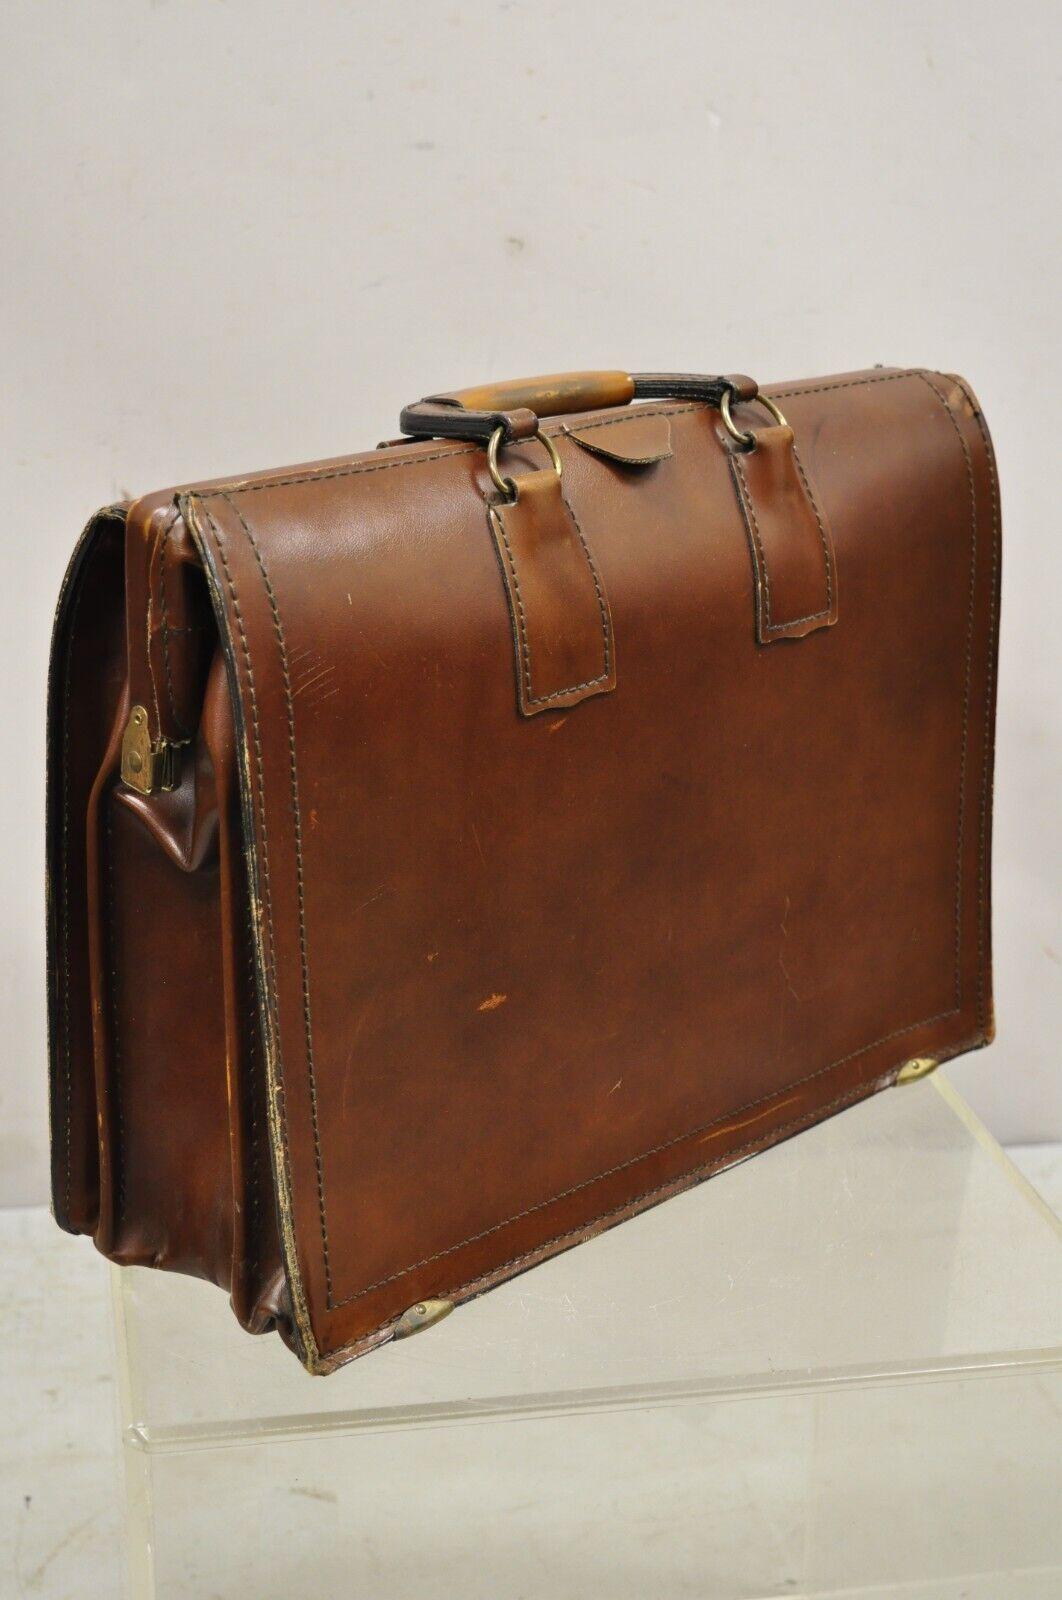 Vintage Mid-Century Modern saddle leather briefcase case by Lion Leather Prods. Item features a beautiful burnished brown style leather, twin handles, two interior side slots/pockets, quality American craftsmanship, circa Mid to late 20th century.